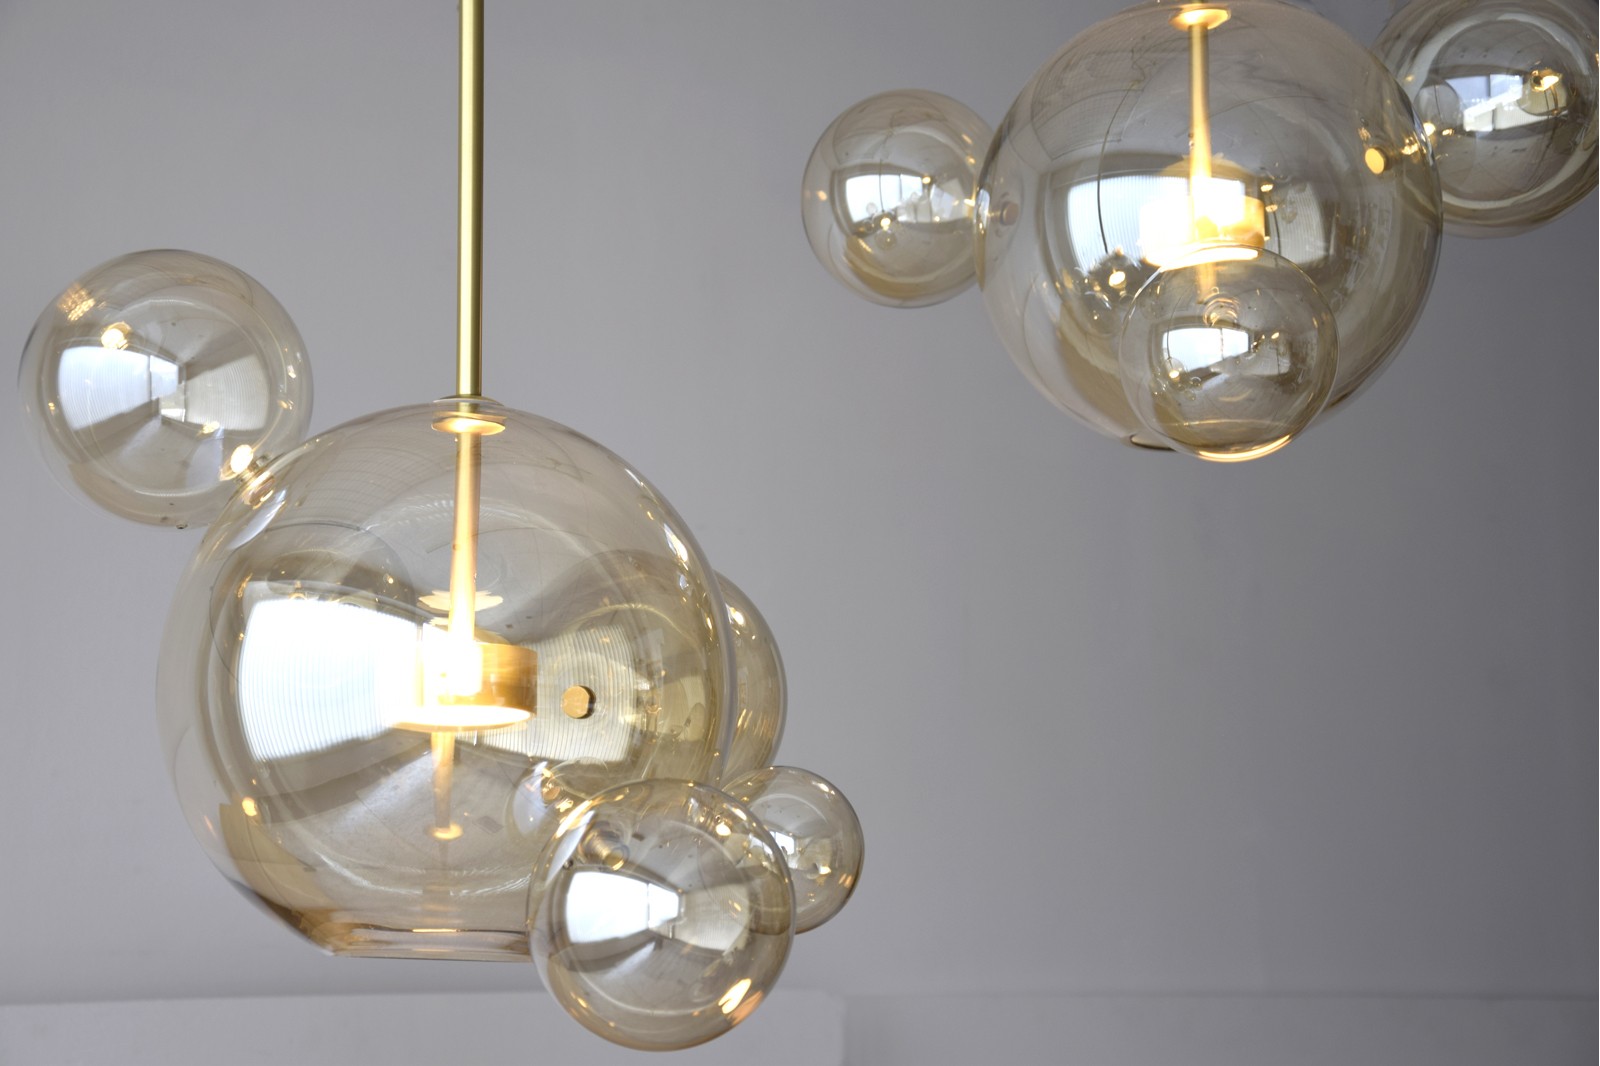 BUBBLE COLLECTION: CEILING LAMP. AMBER GLASS AND BRASS METAL